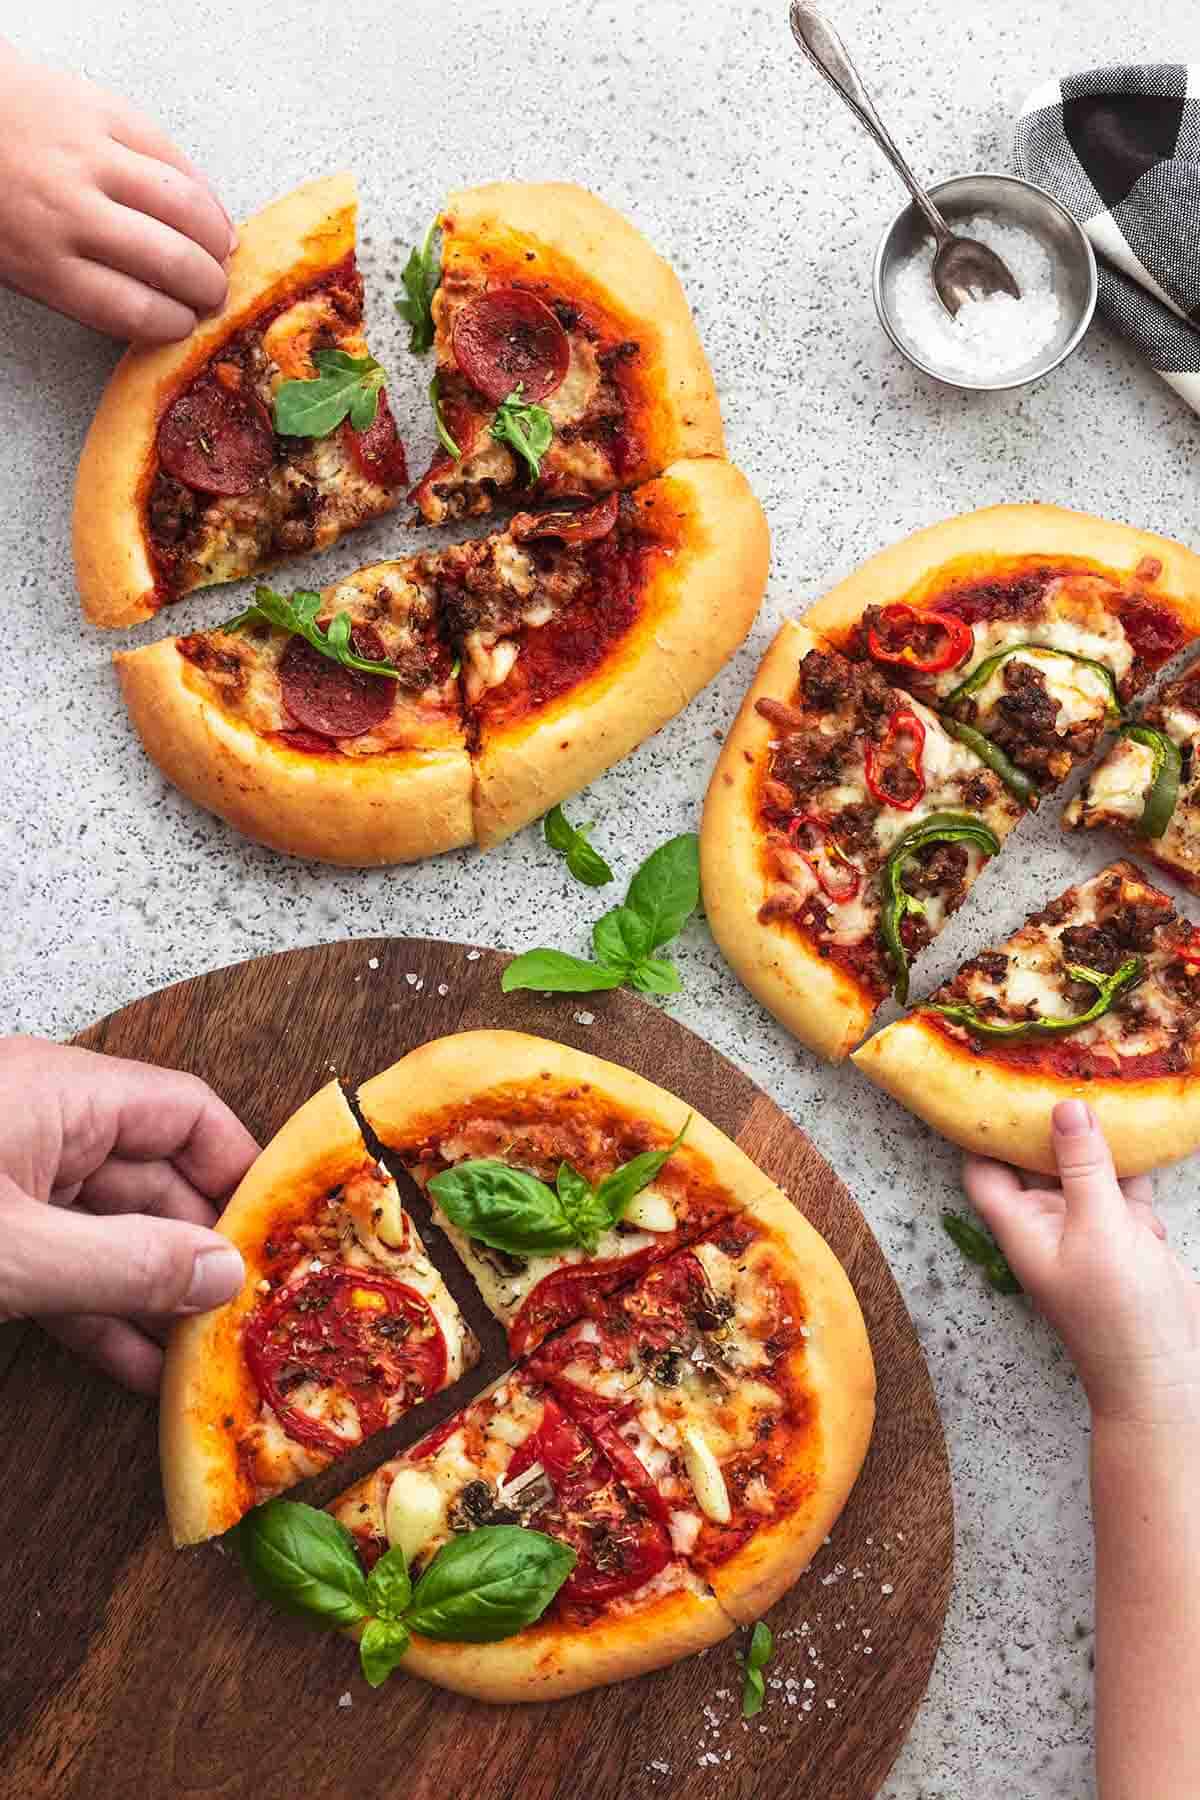 Image of 3 small personal pizzas with basil, pepperoni, and tomato on them, the bottom one on a cutting board, and all of them with a hand grabbing one piece; picture is from an aerial view.